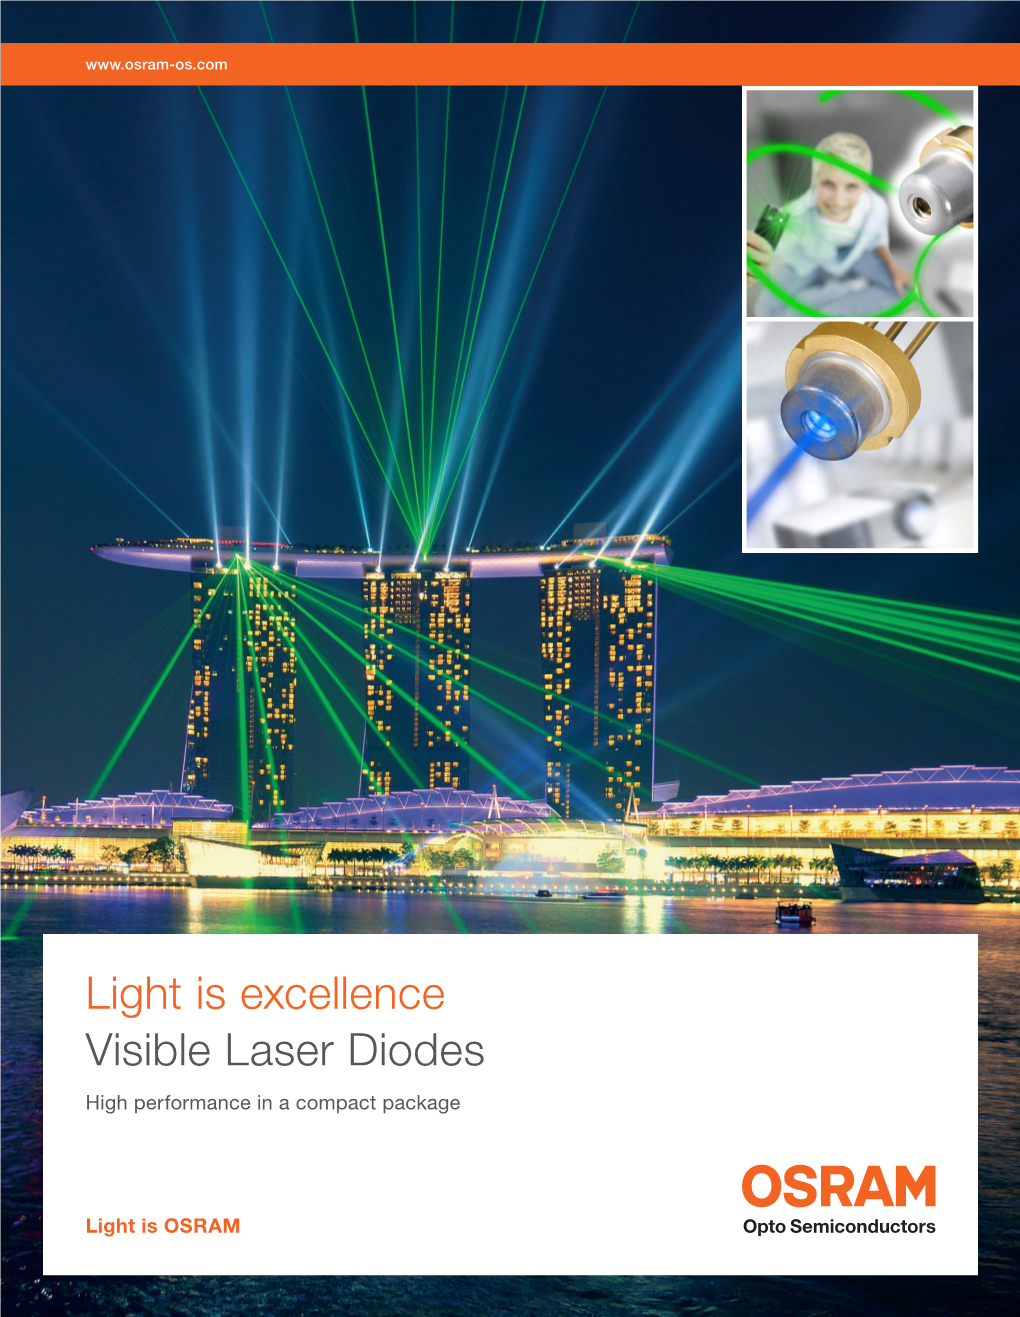 Light Is Excellence Visible Laser Diodes High Performance in a Compact Package